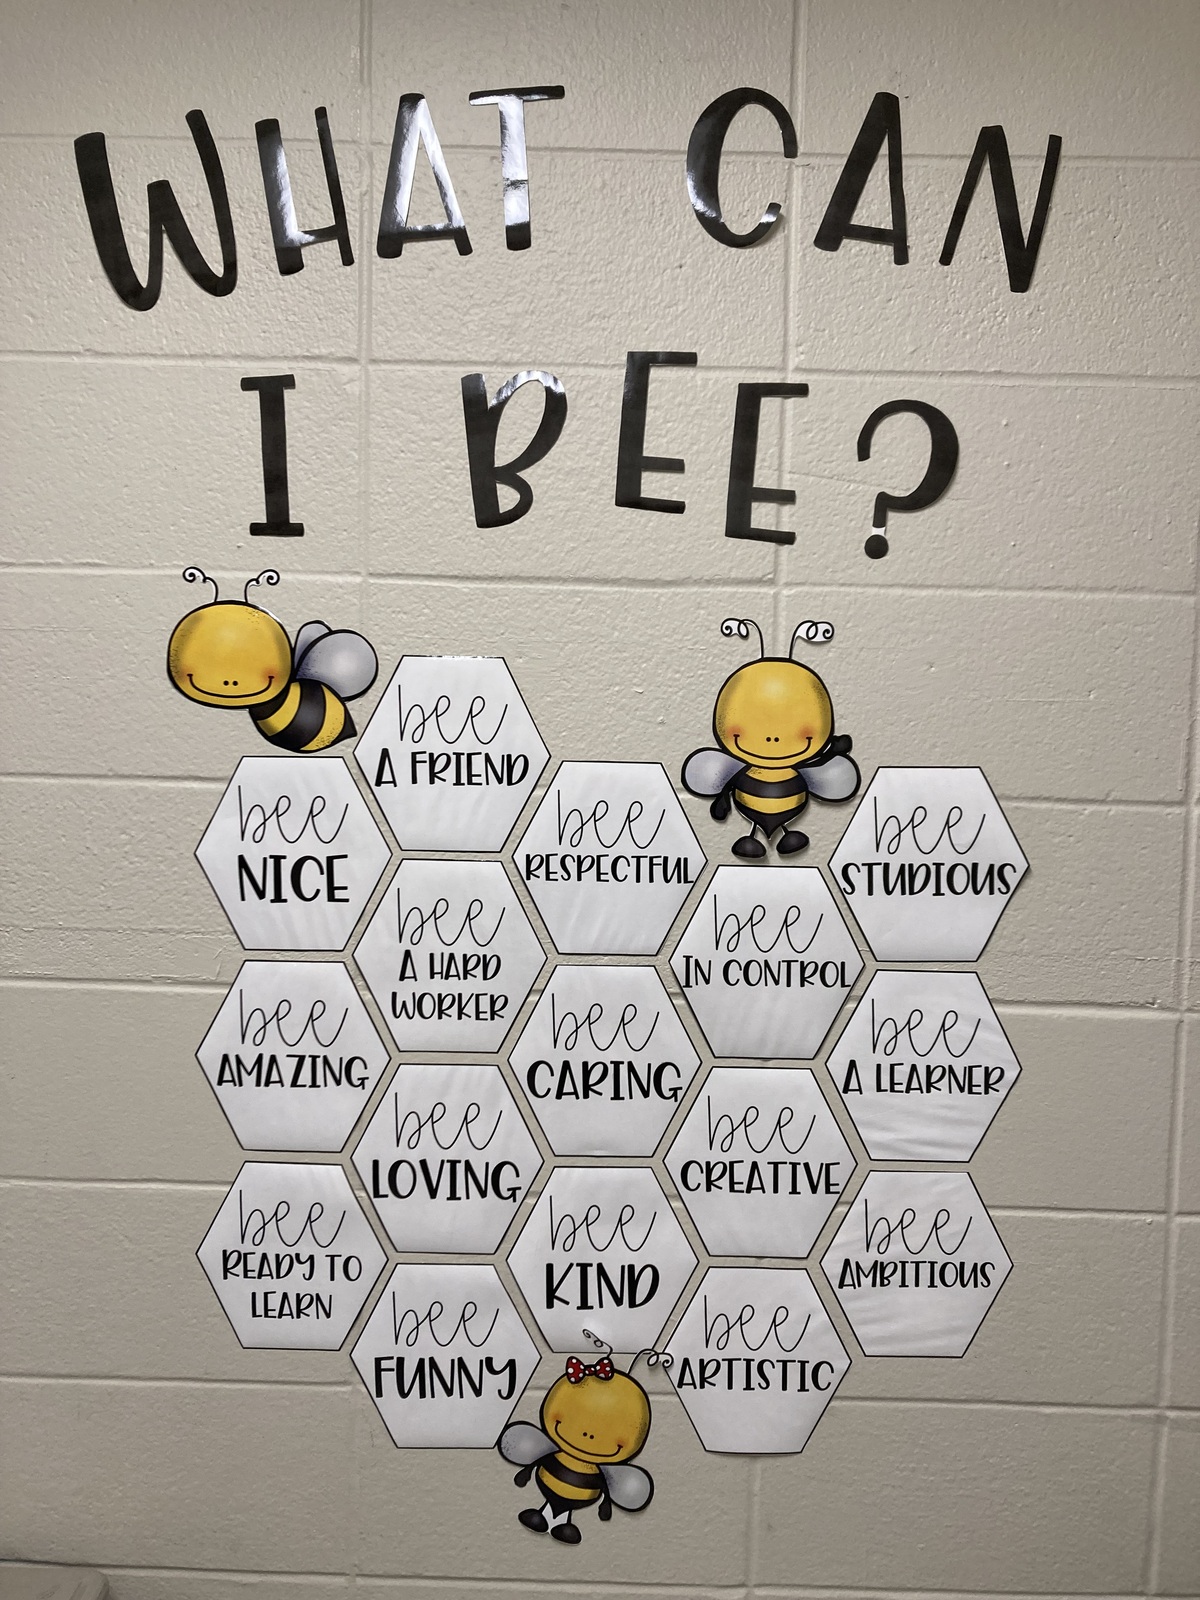 "What Can I Bee" wall with nice word as honeycomb shapes